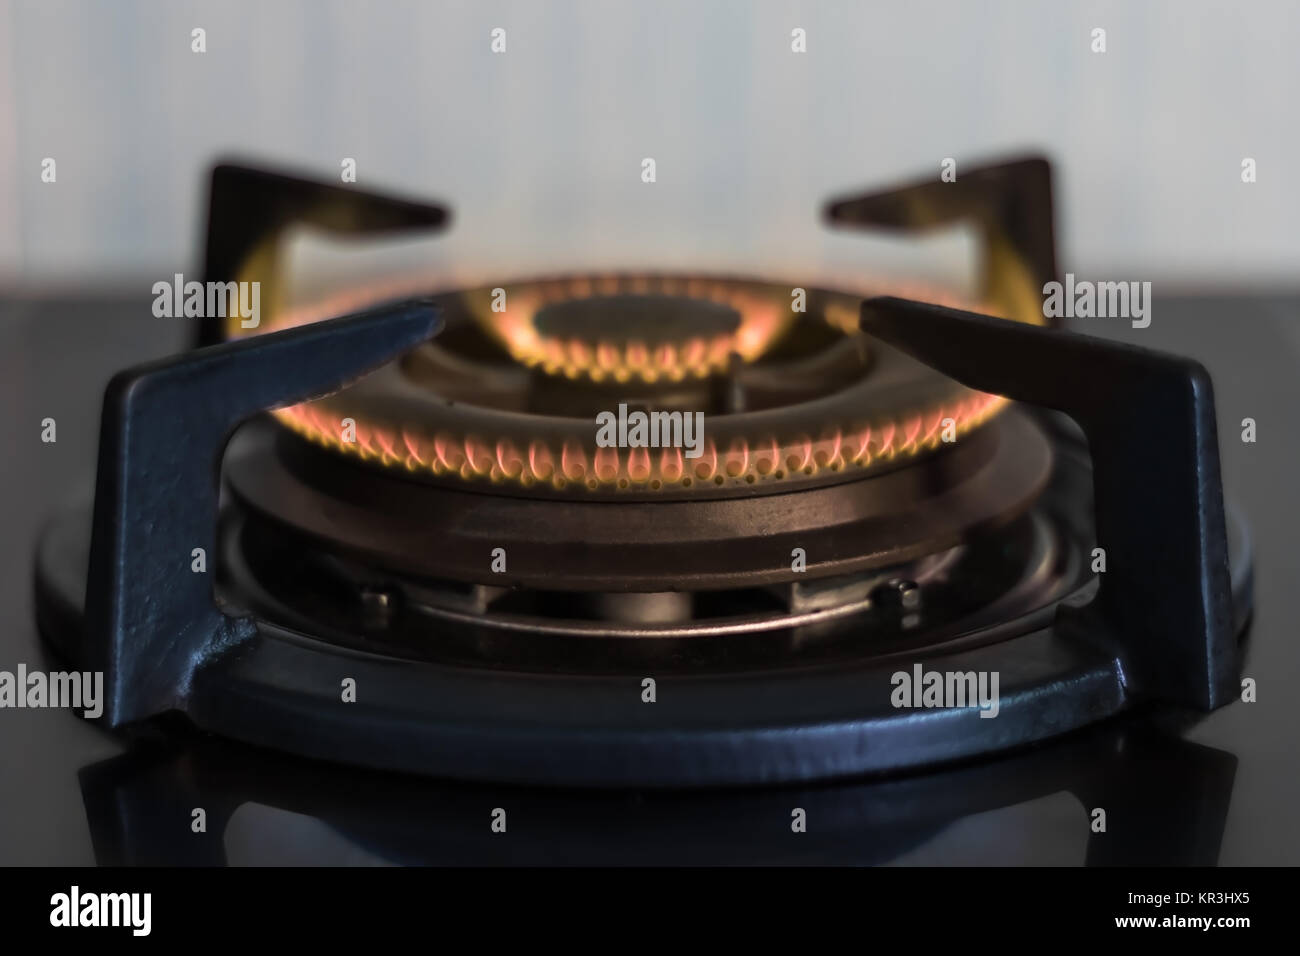 Gas stove burners in the kitchen Stock Photo